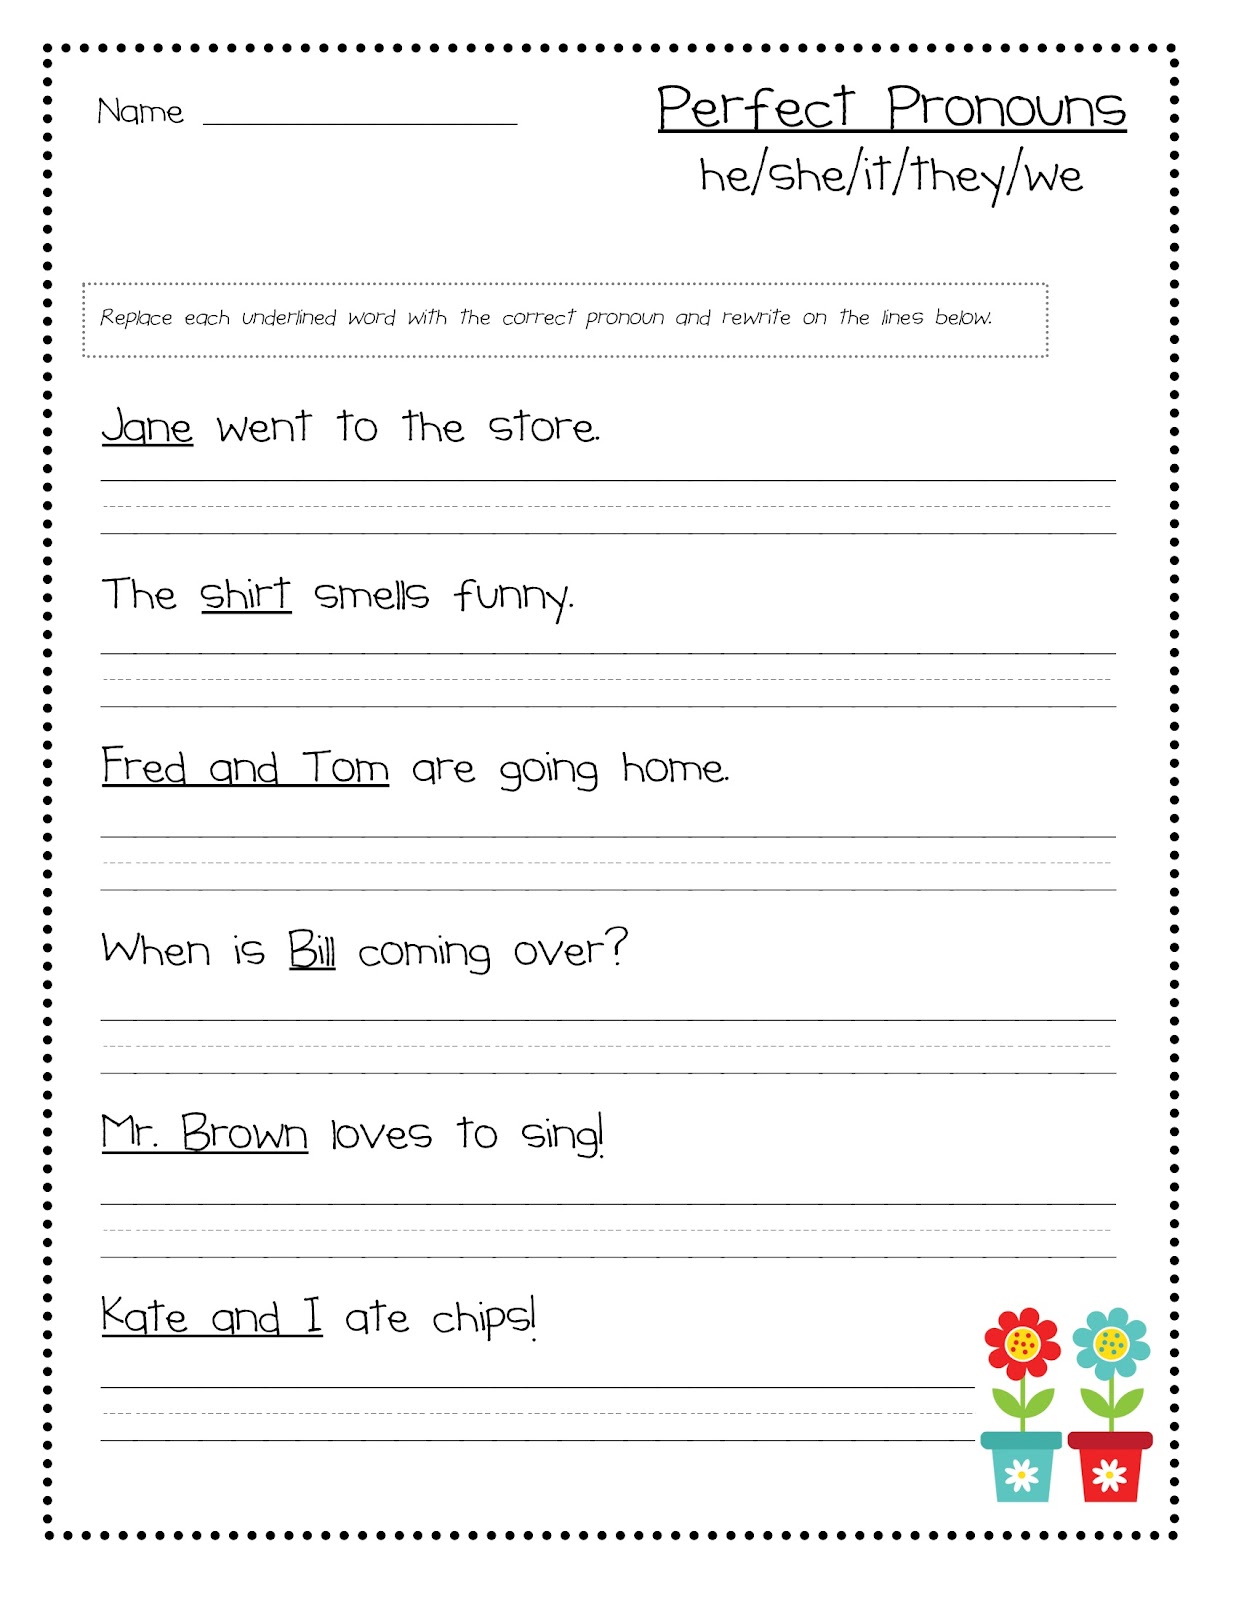 Grade 5 Pronouns Worksheets K5 Learning Pronouns Activity For 5th 